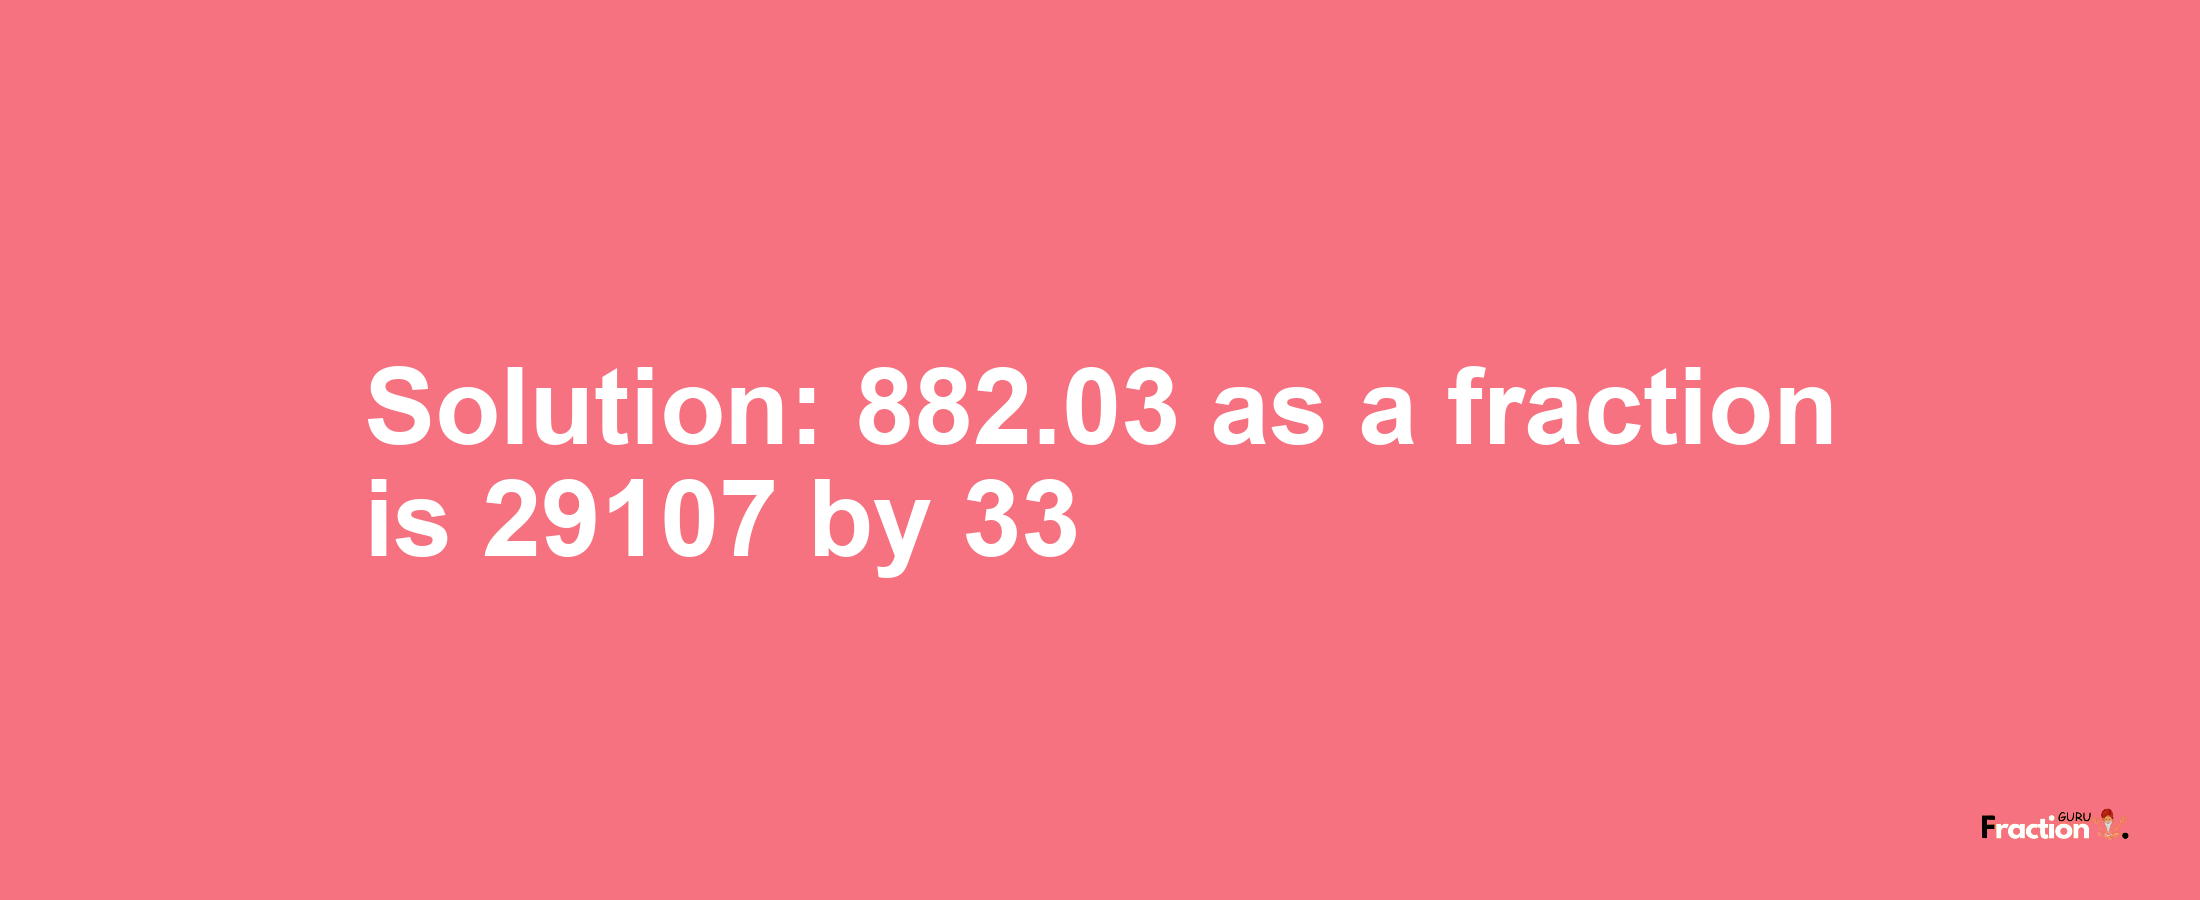 Solution:882.03 as a fraction is 29107/33